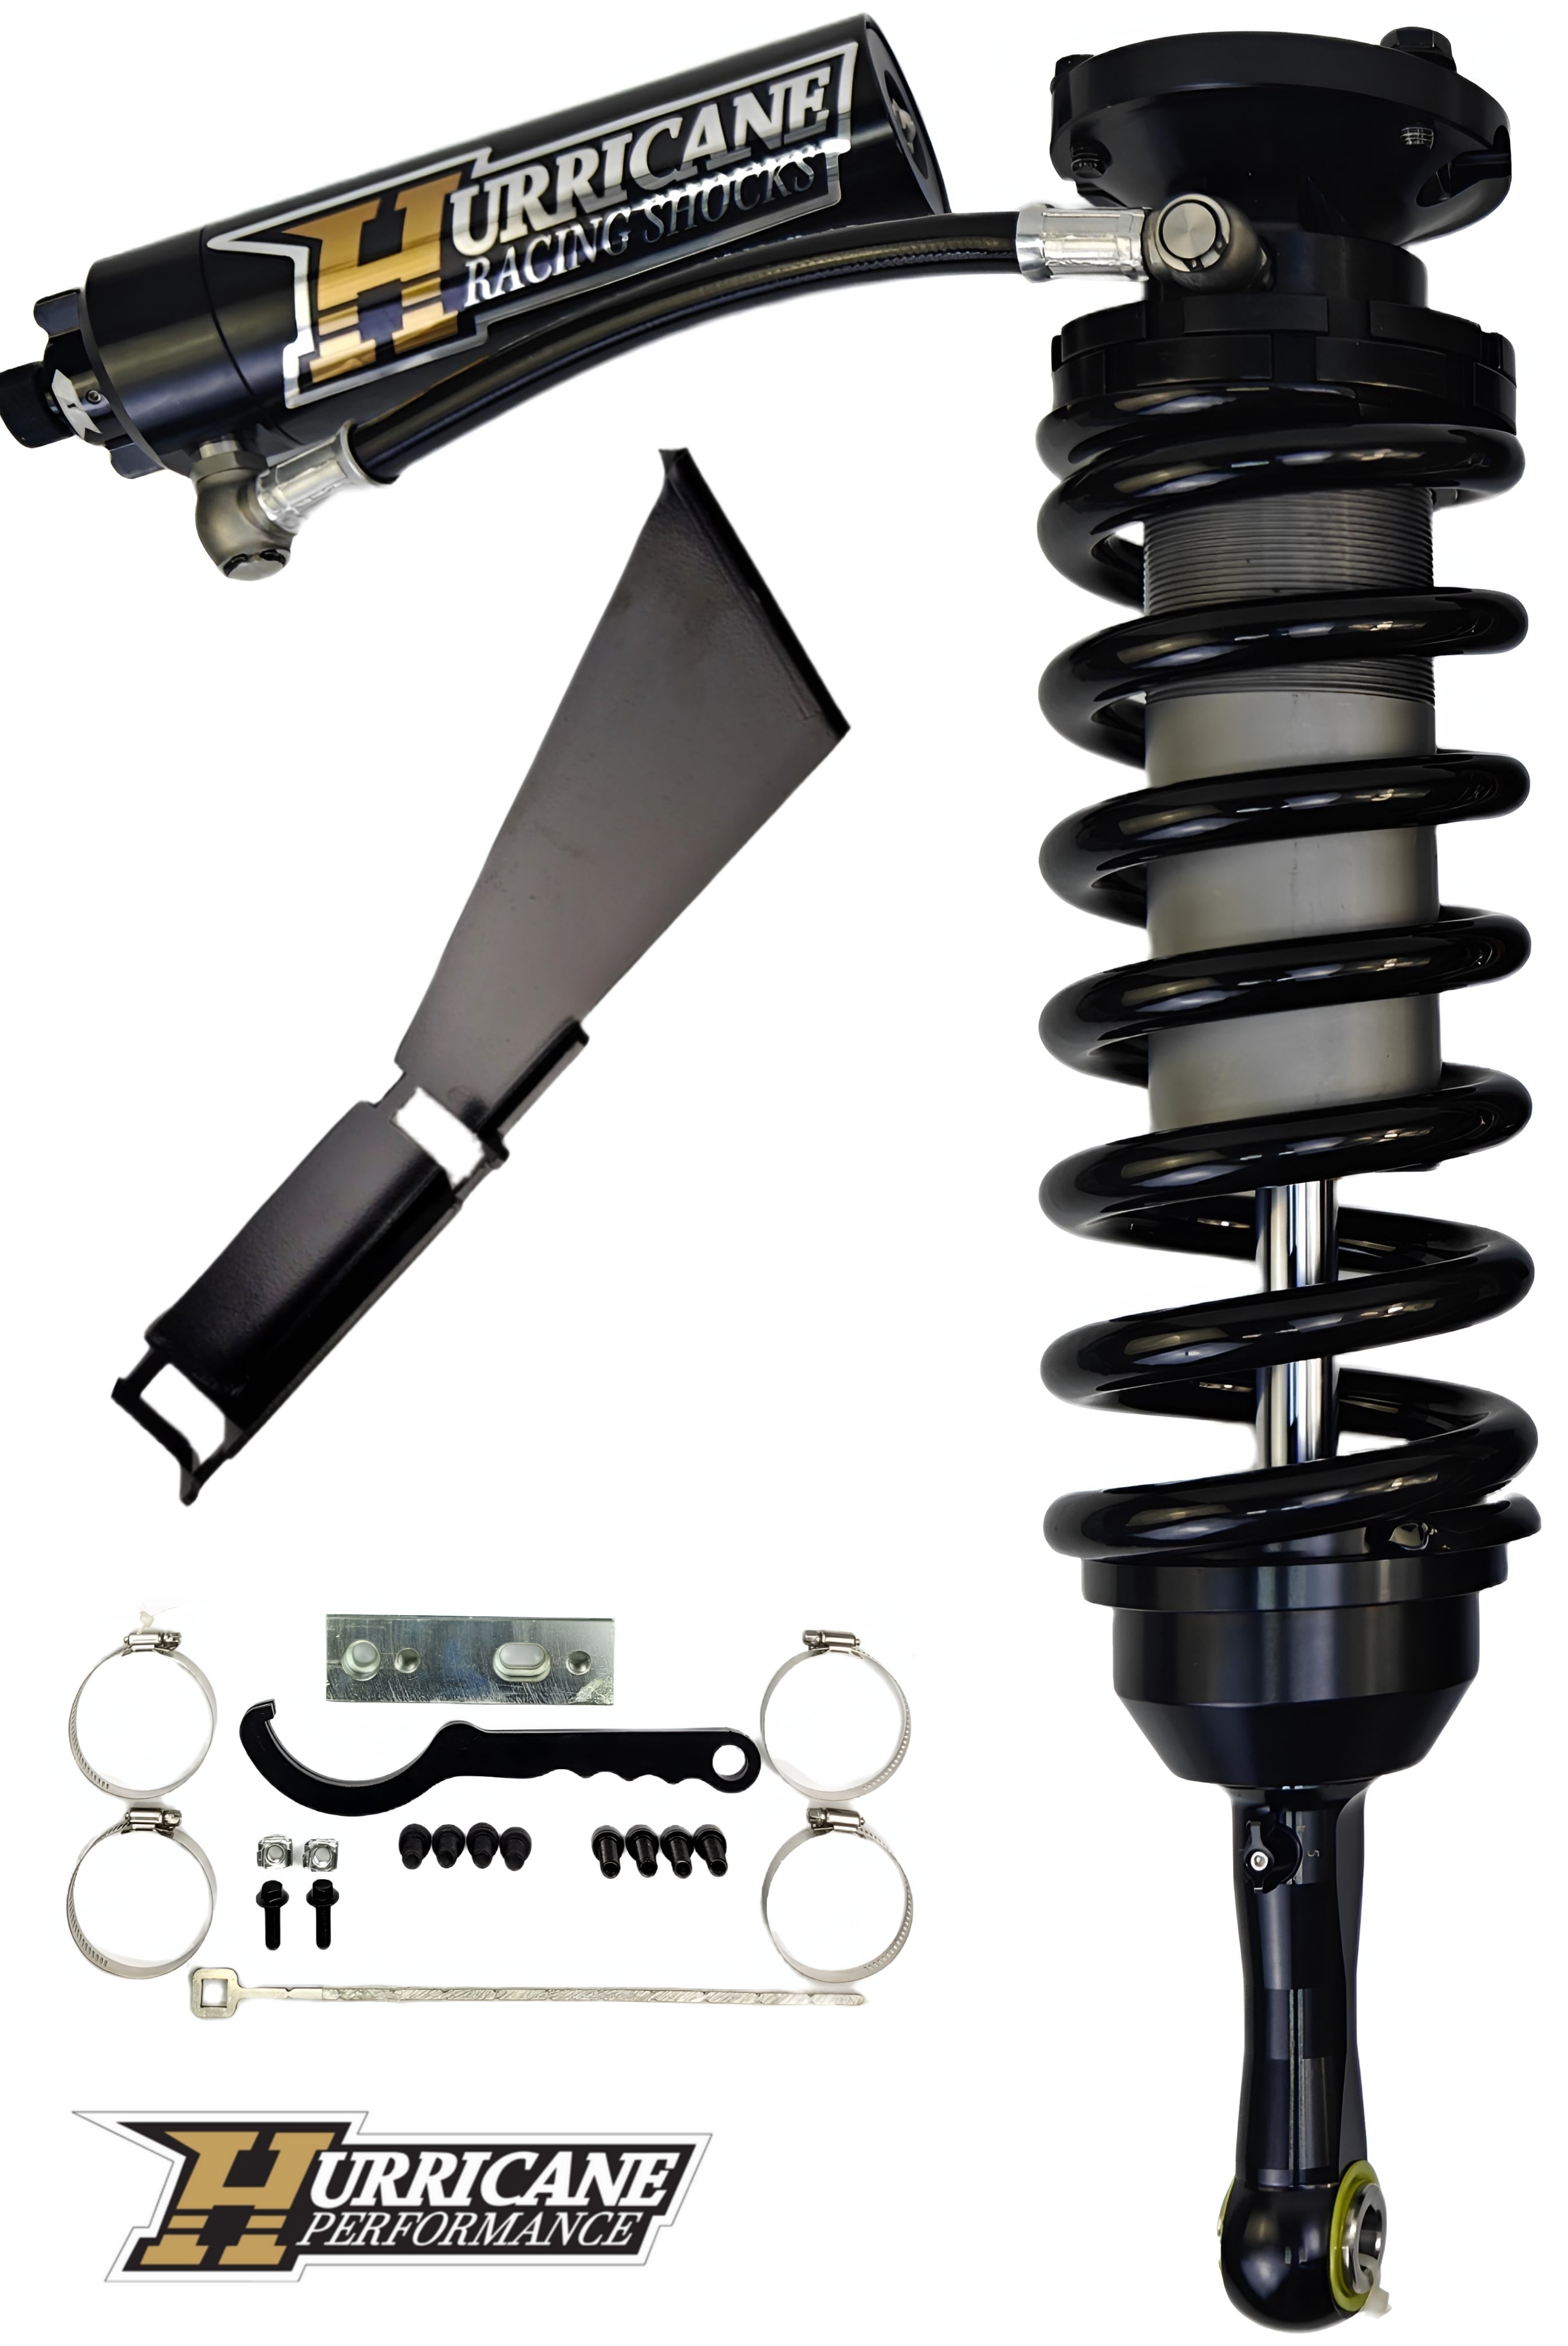 HURRICANE PERFORMANCE EXTREME SERIES 3.0 DOUBLE COMPRESSION ADJUST & SINGLE REBOUND ADJUST  FRONT COIL-OVER SHOCKS & 2.5 REAR EXTERNAL DOUBLE BYPASS SHOCKS FOR FJ CRUISER PRADO, 4RUNNER AND FORTUNER